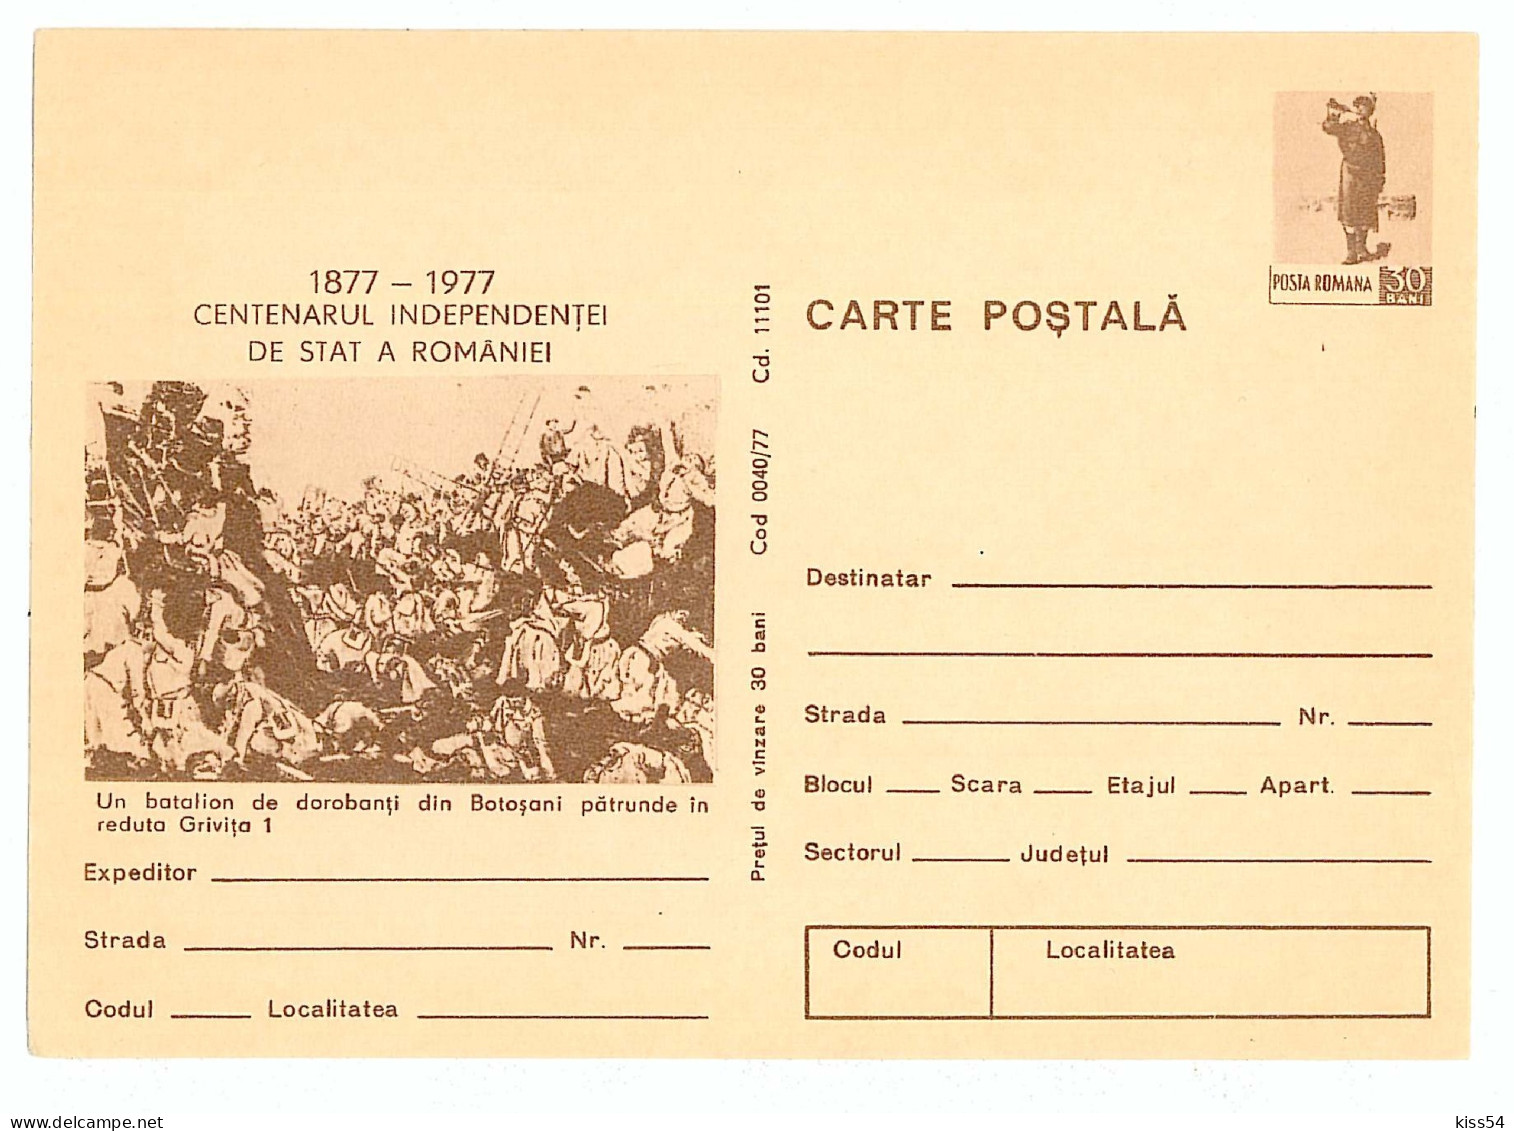 IP 77 A - 40a Centenary Independence Of Romania - Stationery - Unused - 1977 - Postal Stationery